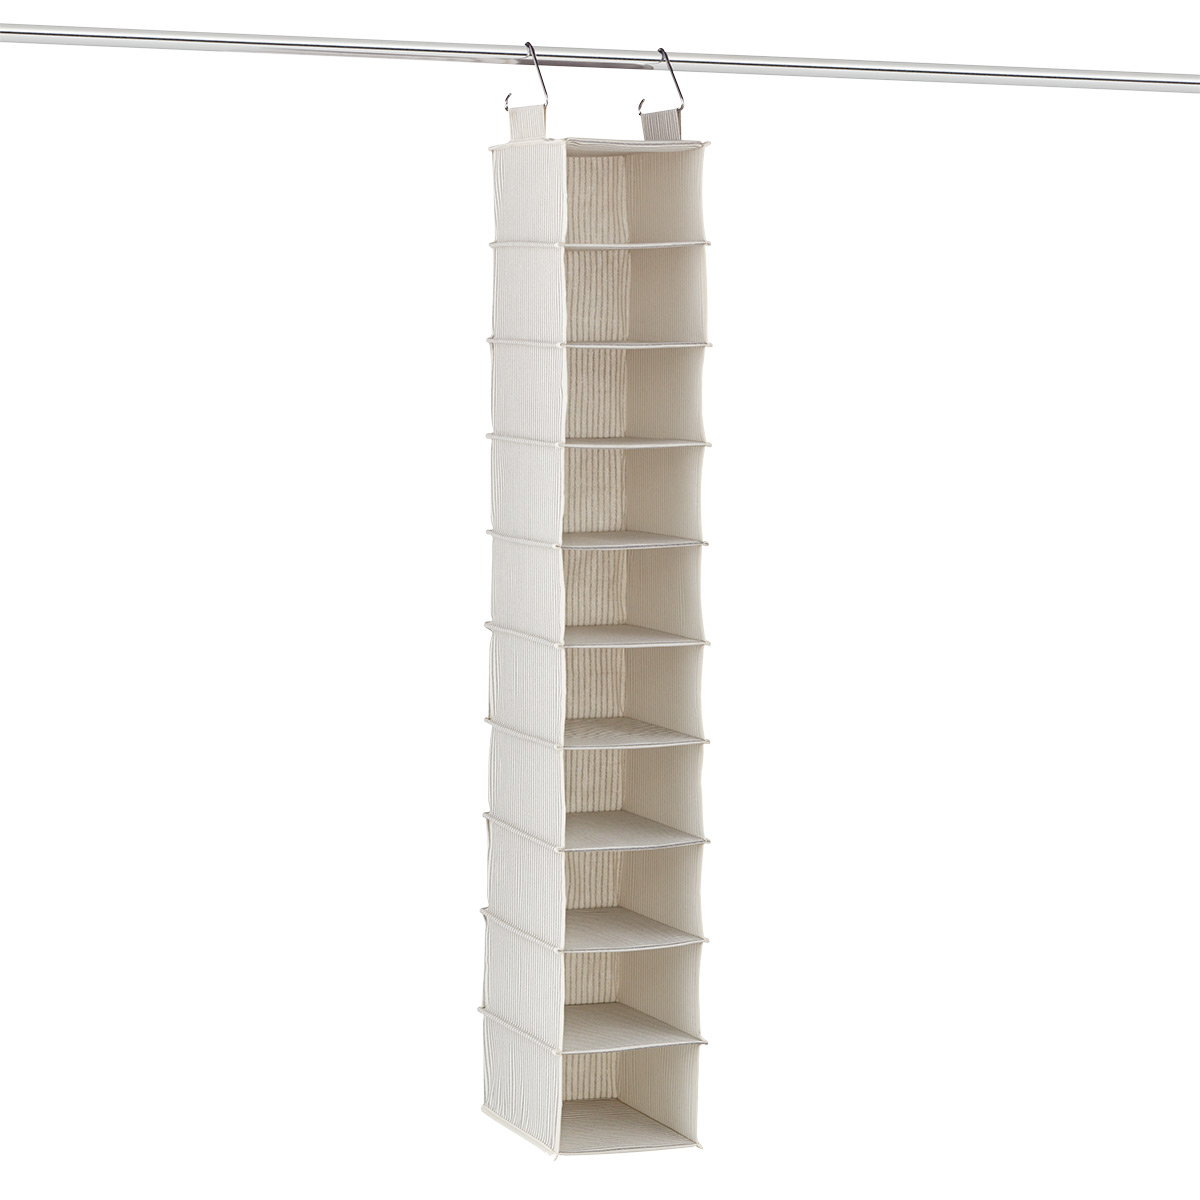 The Container Store Hanging Closet Organizers | The Container Store